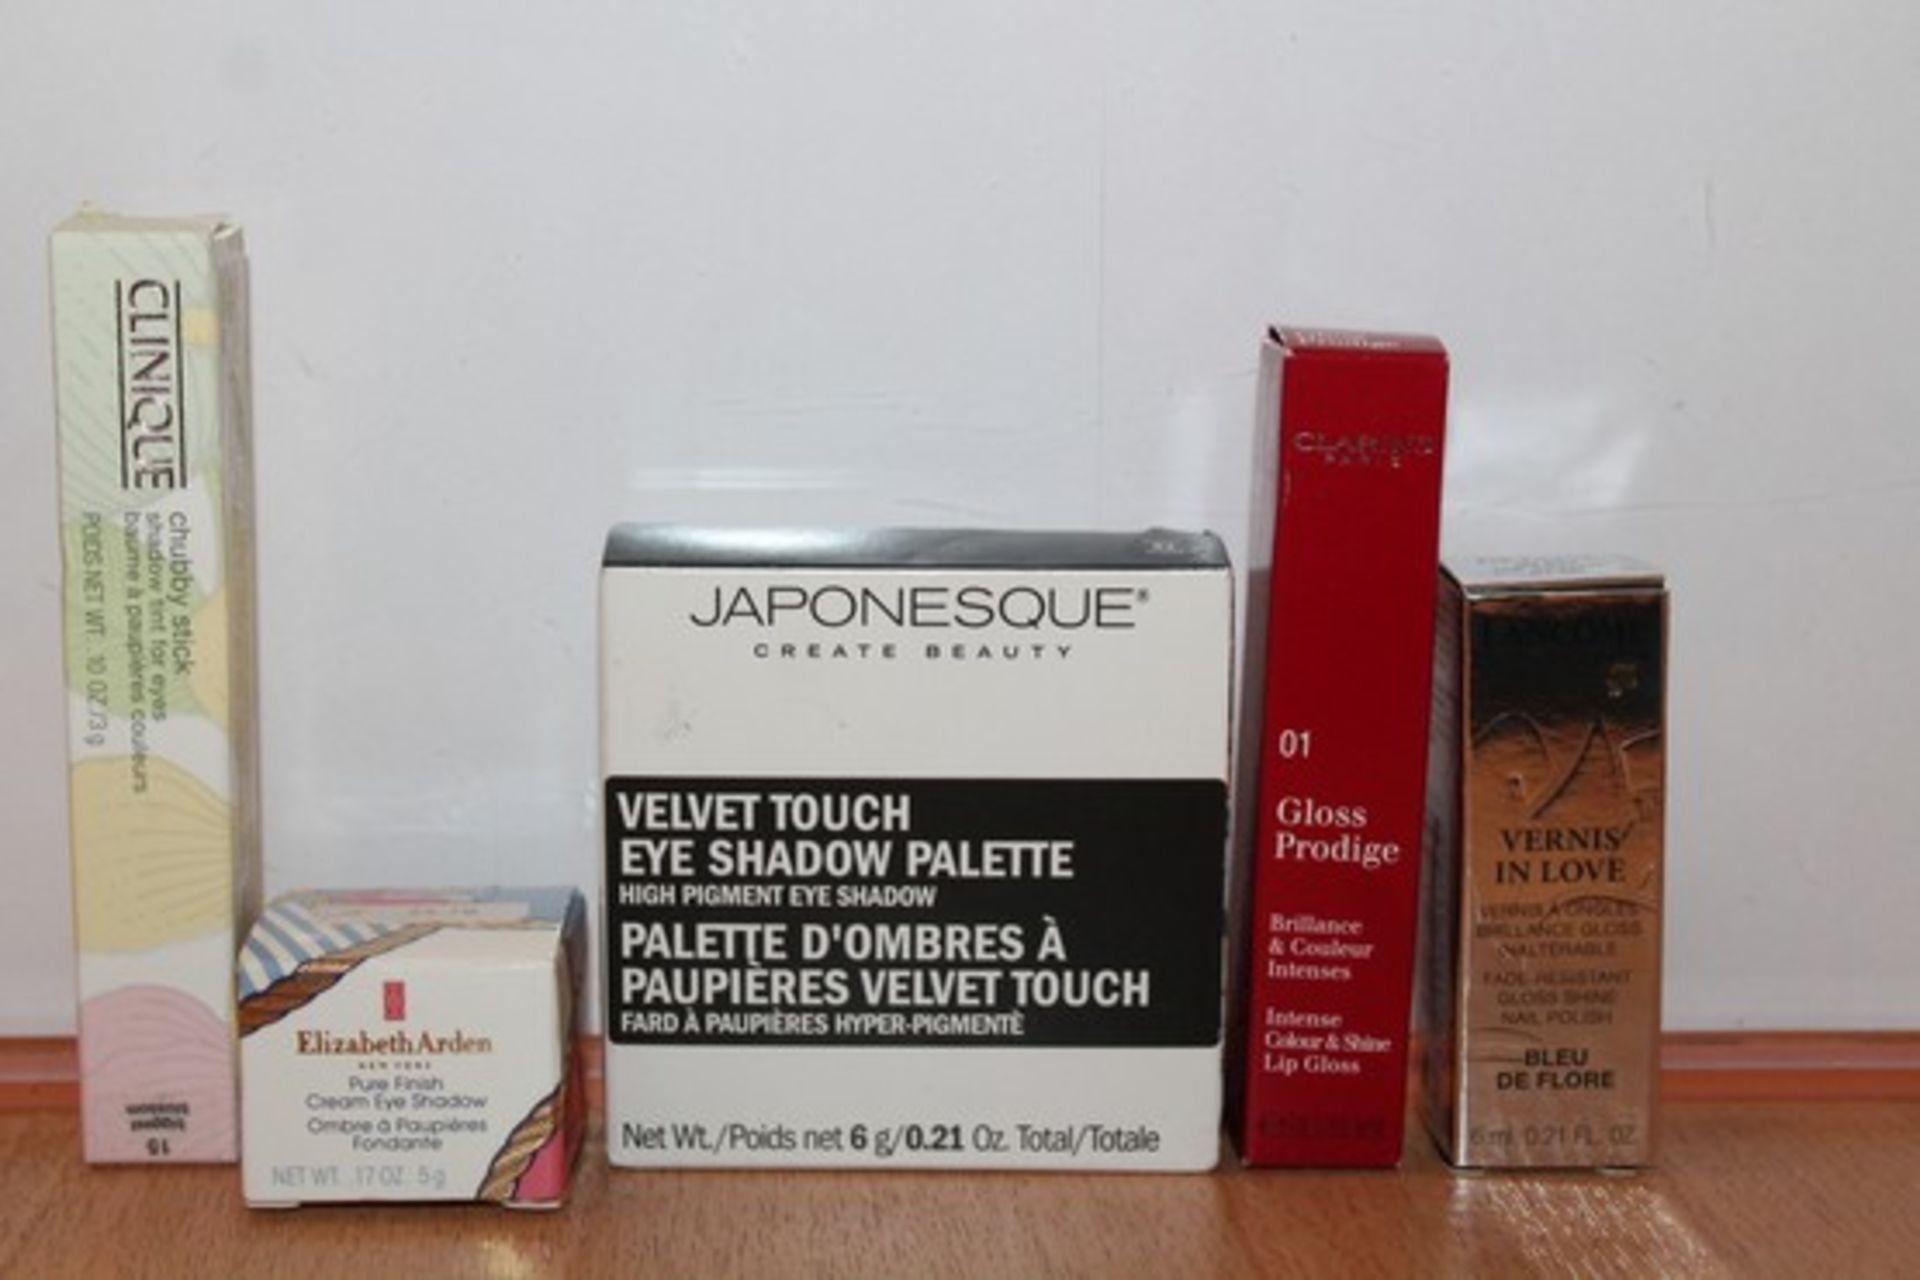 5X ASSORTED BRAND NEW LADIES MAKE UP ITEMS BY LANCOME, BOBBI BROWN, SISLEY, BARE MINERALS, LAURA